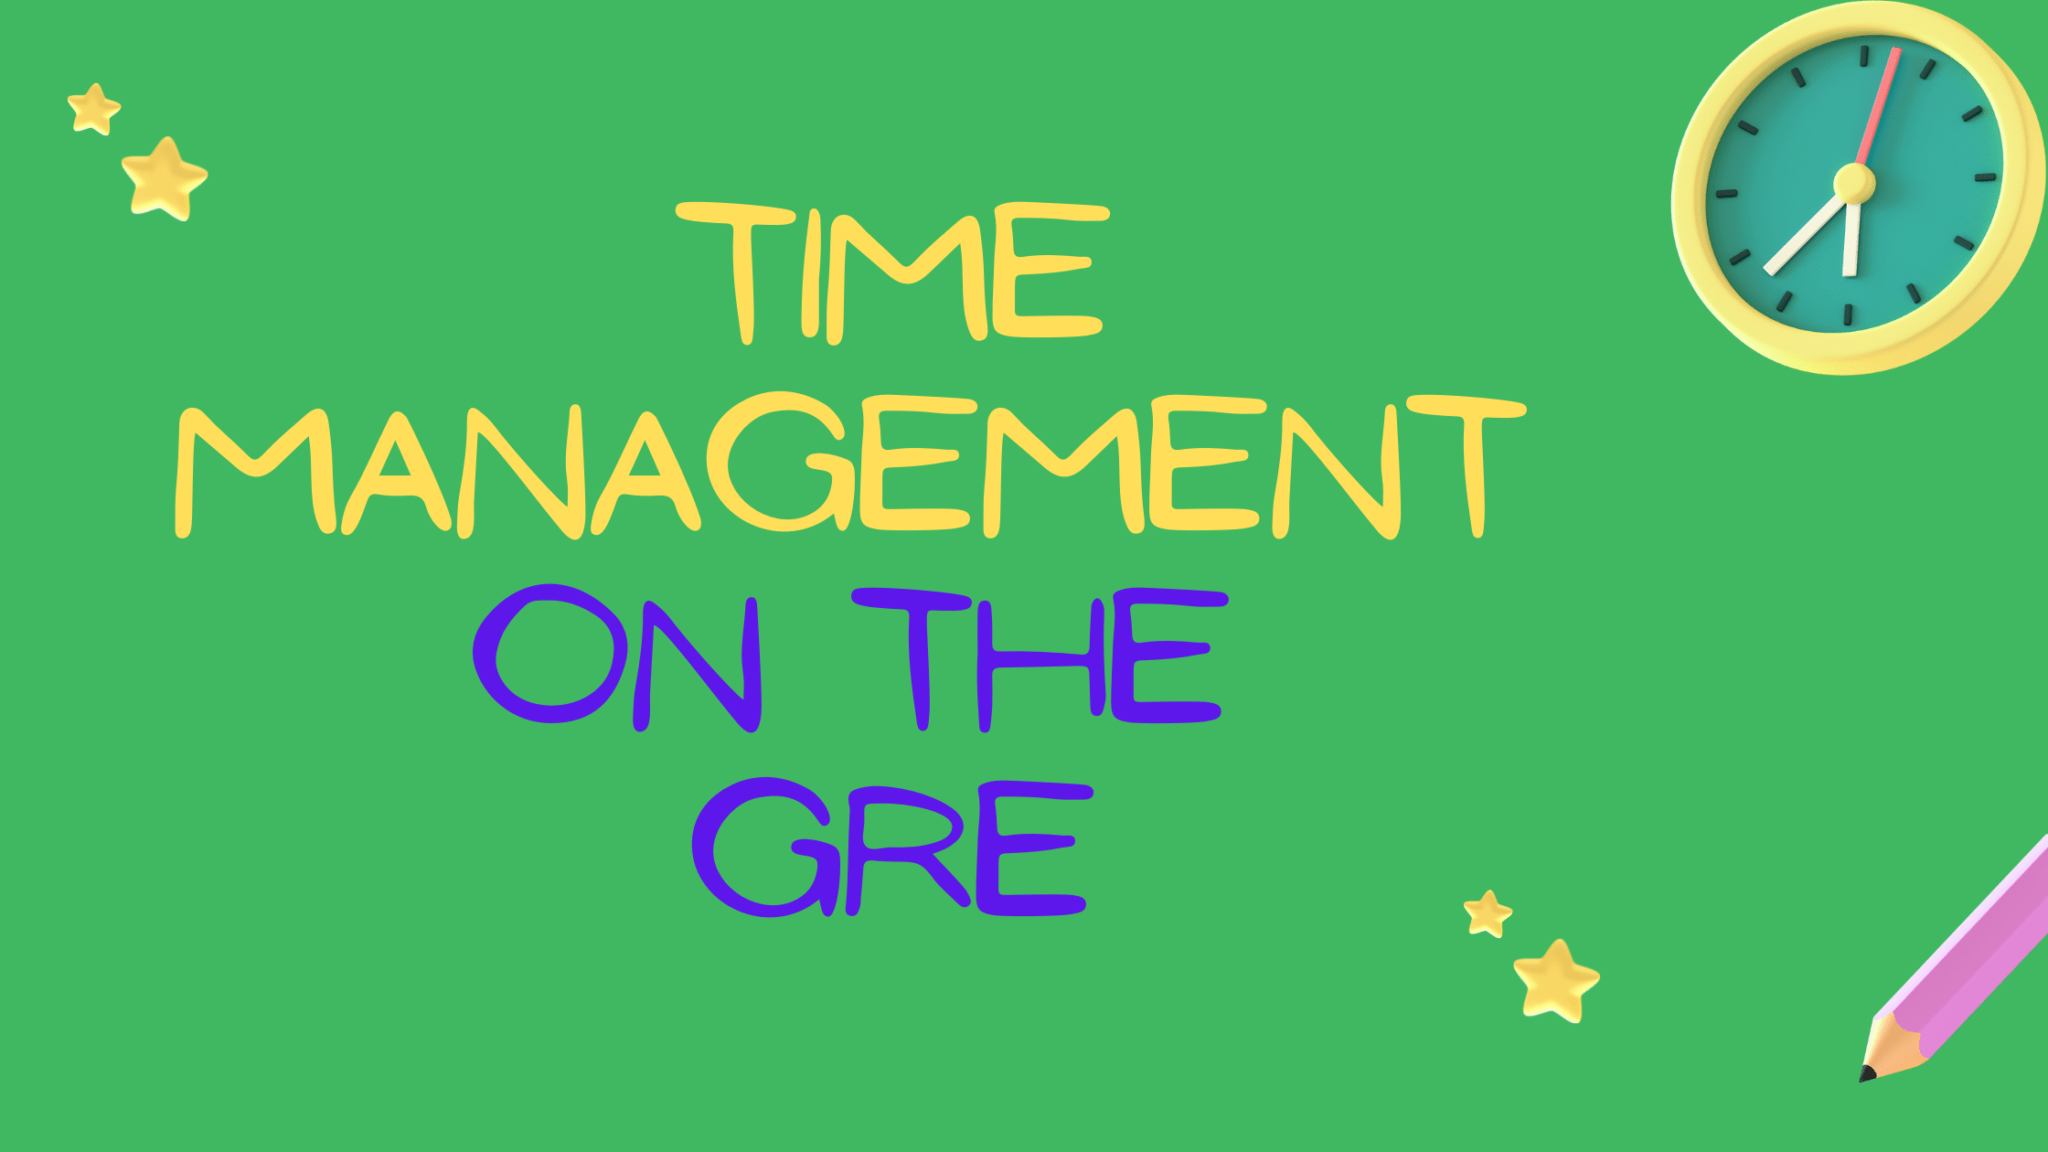 Time Management on the GRE